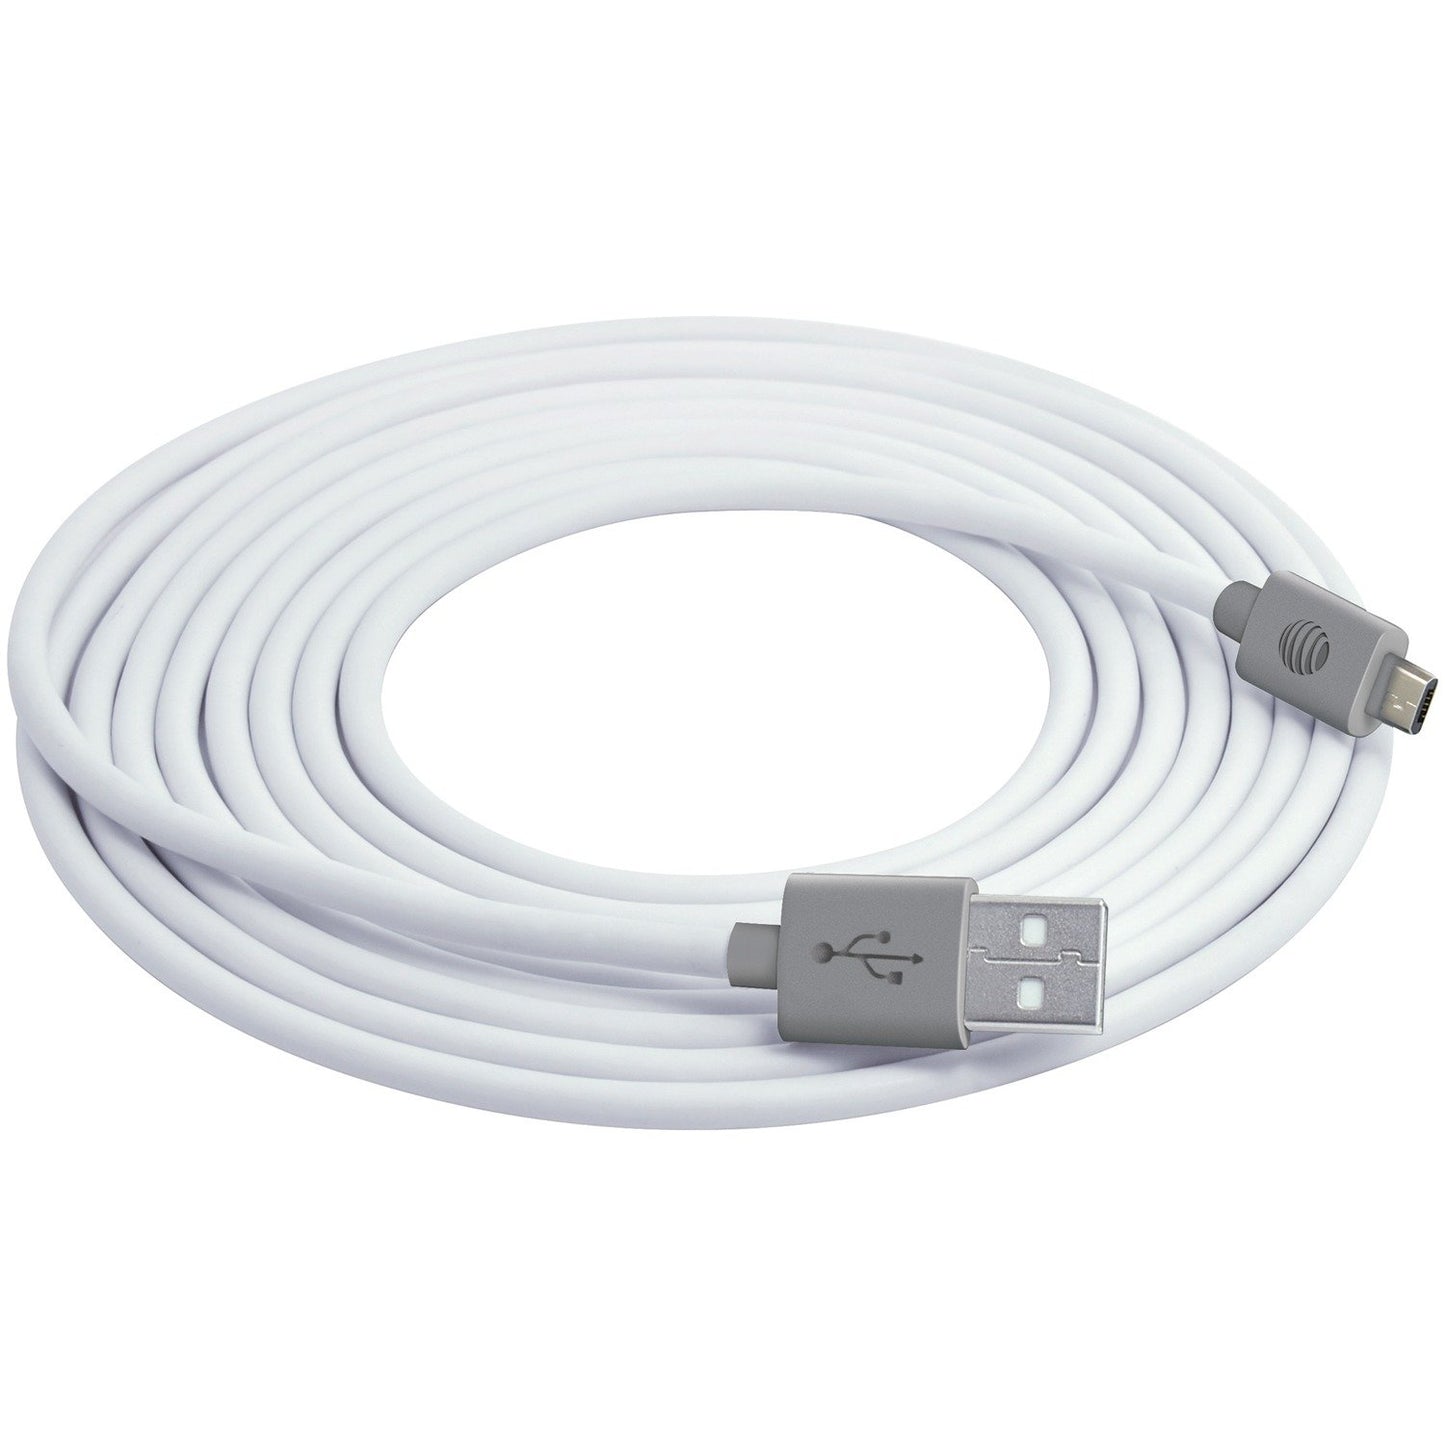 AT&T MC10-WHT Charge & Sync USB to Micro USB Cable, 10ft (White)